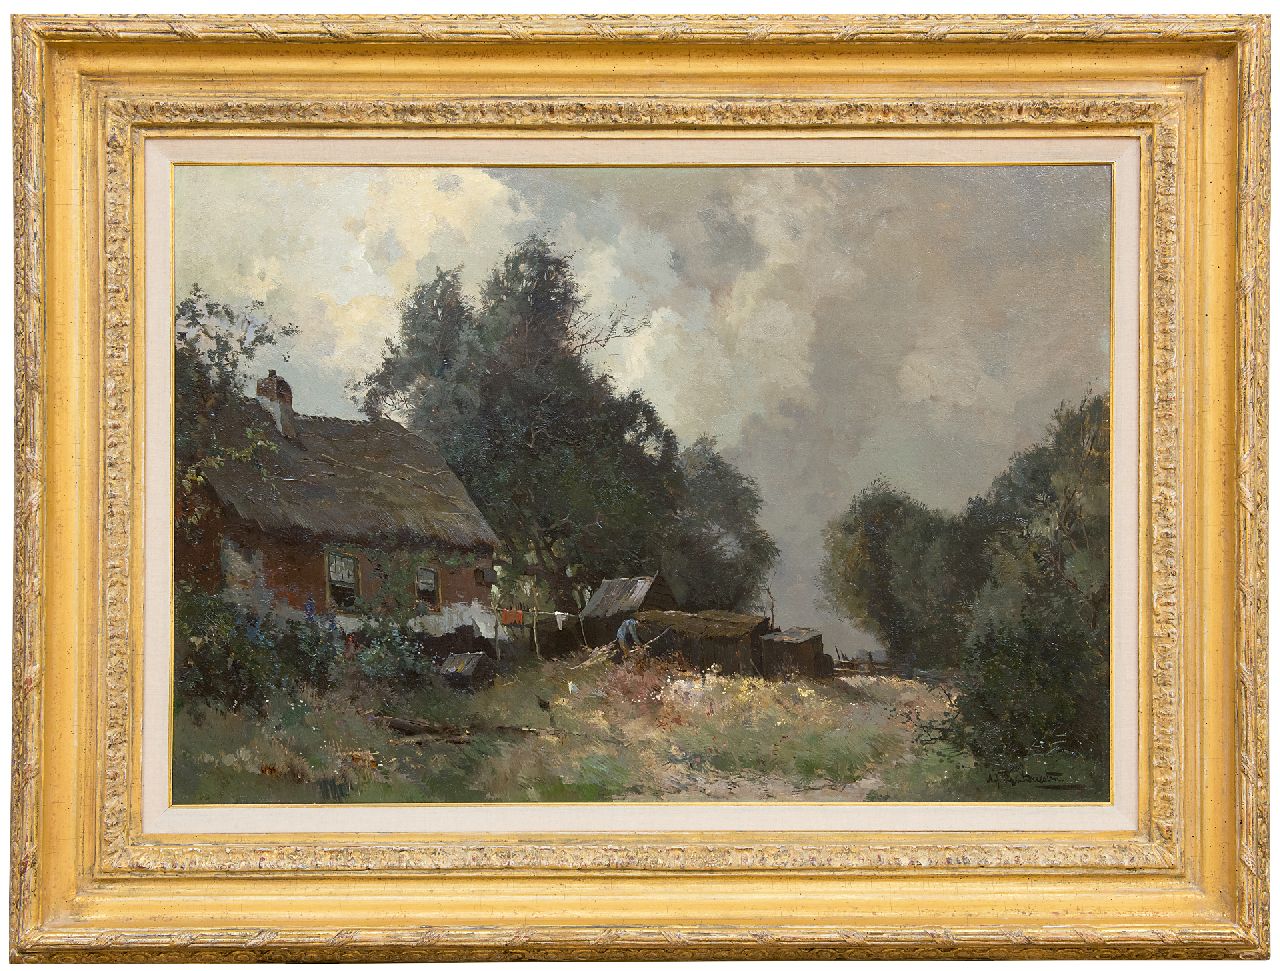 Driesten A.J. van | Arend Jan van Driesten | Paintings offered for sale | At work on the farmyard        Farmer working in his yard, oil on canvas 52.5 x 76.5 cm, signed l.r.